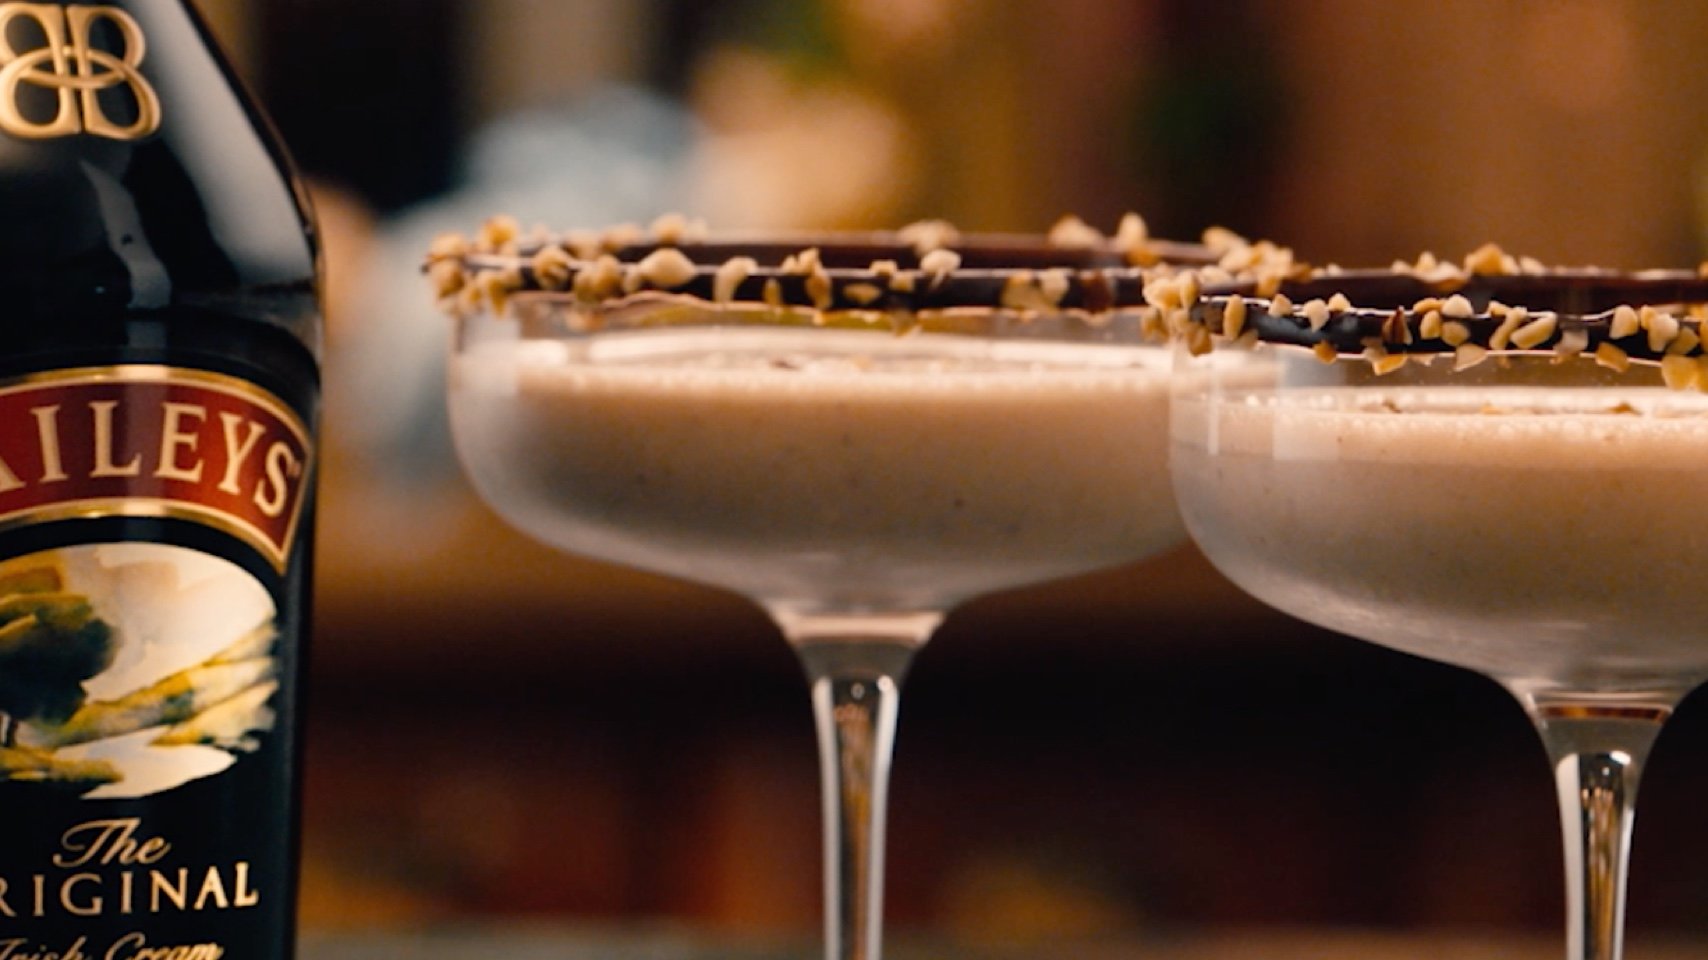 Cocktail glasses with Baileys-infused cocktail and melted chocolate with hazelnuts